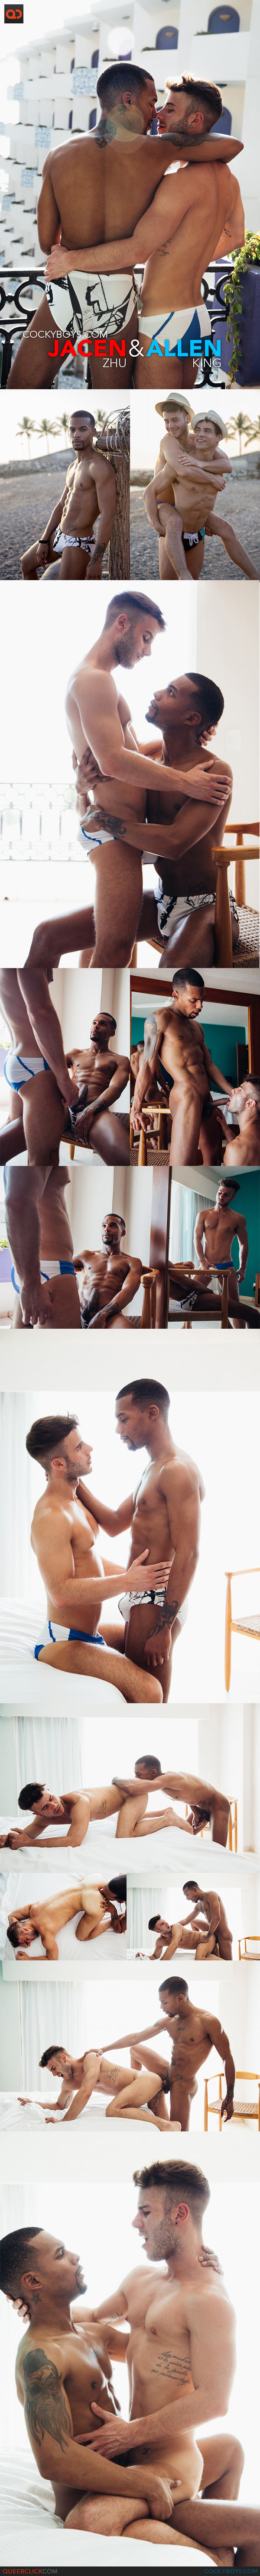 CockyBoys: Allen King and Jacen Zhu